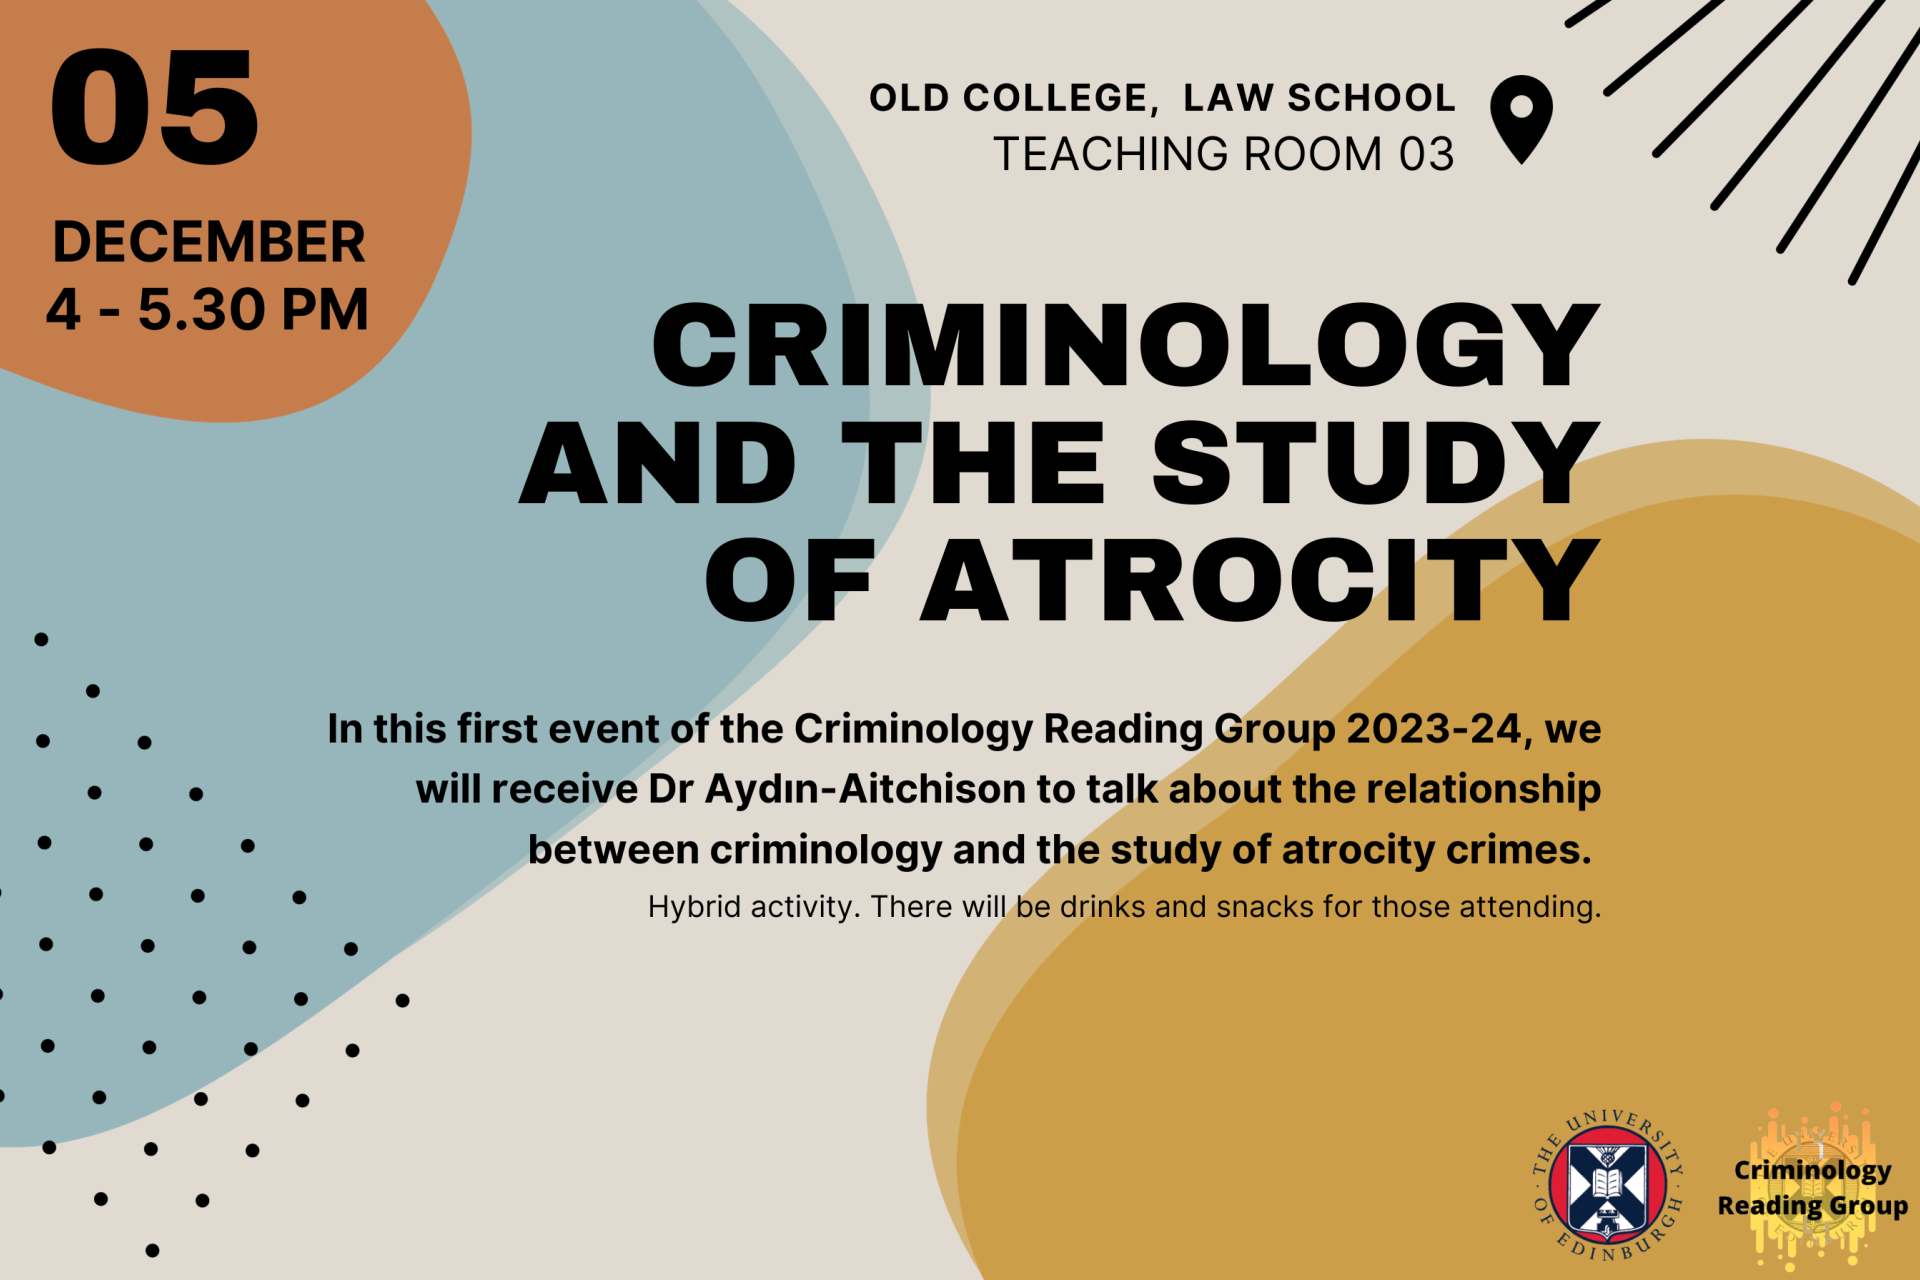 Criminology and the study of atrocity